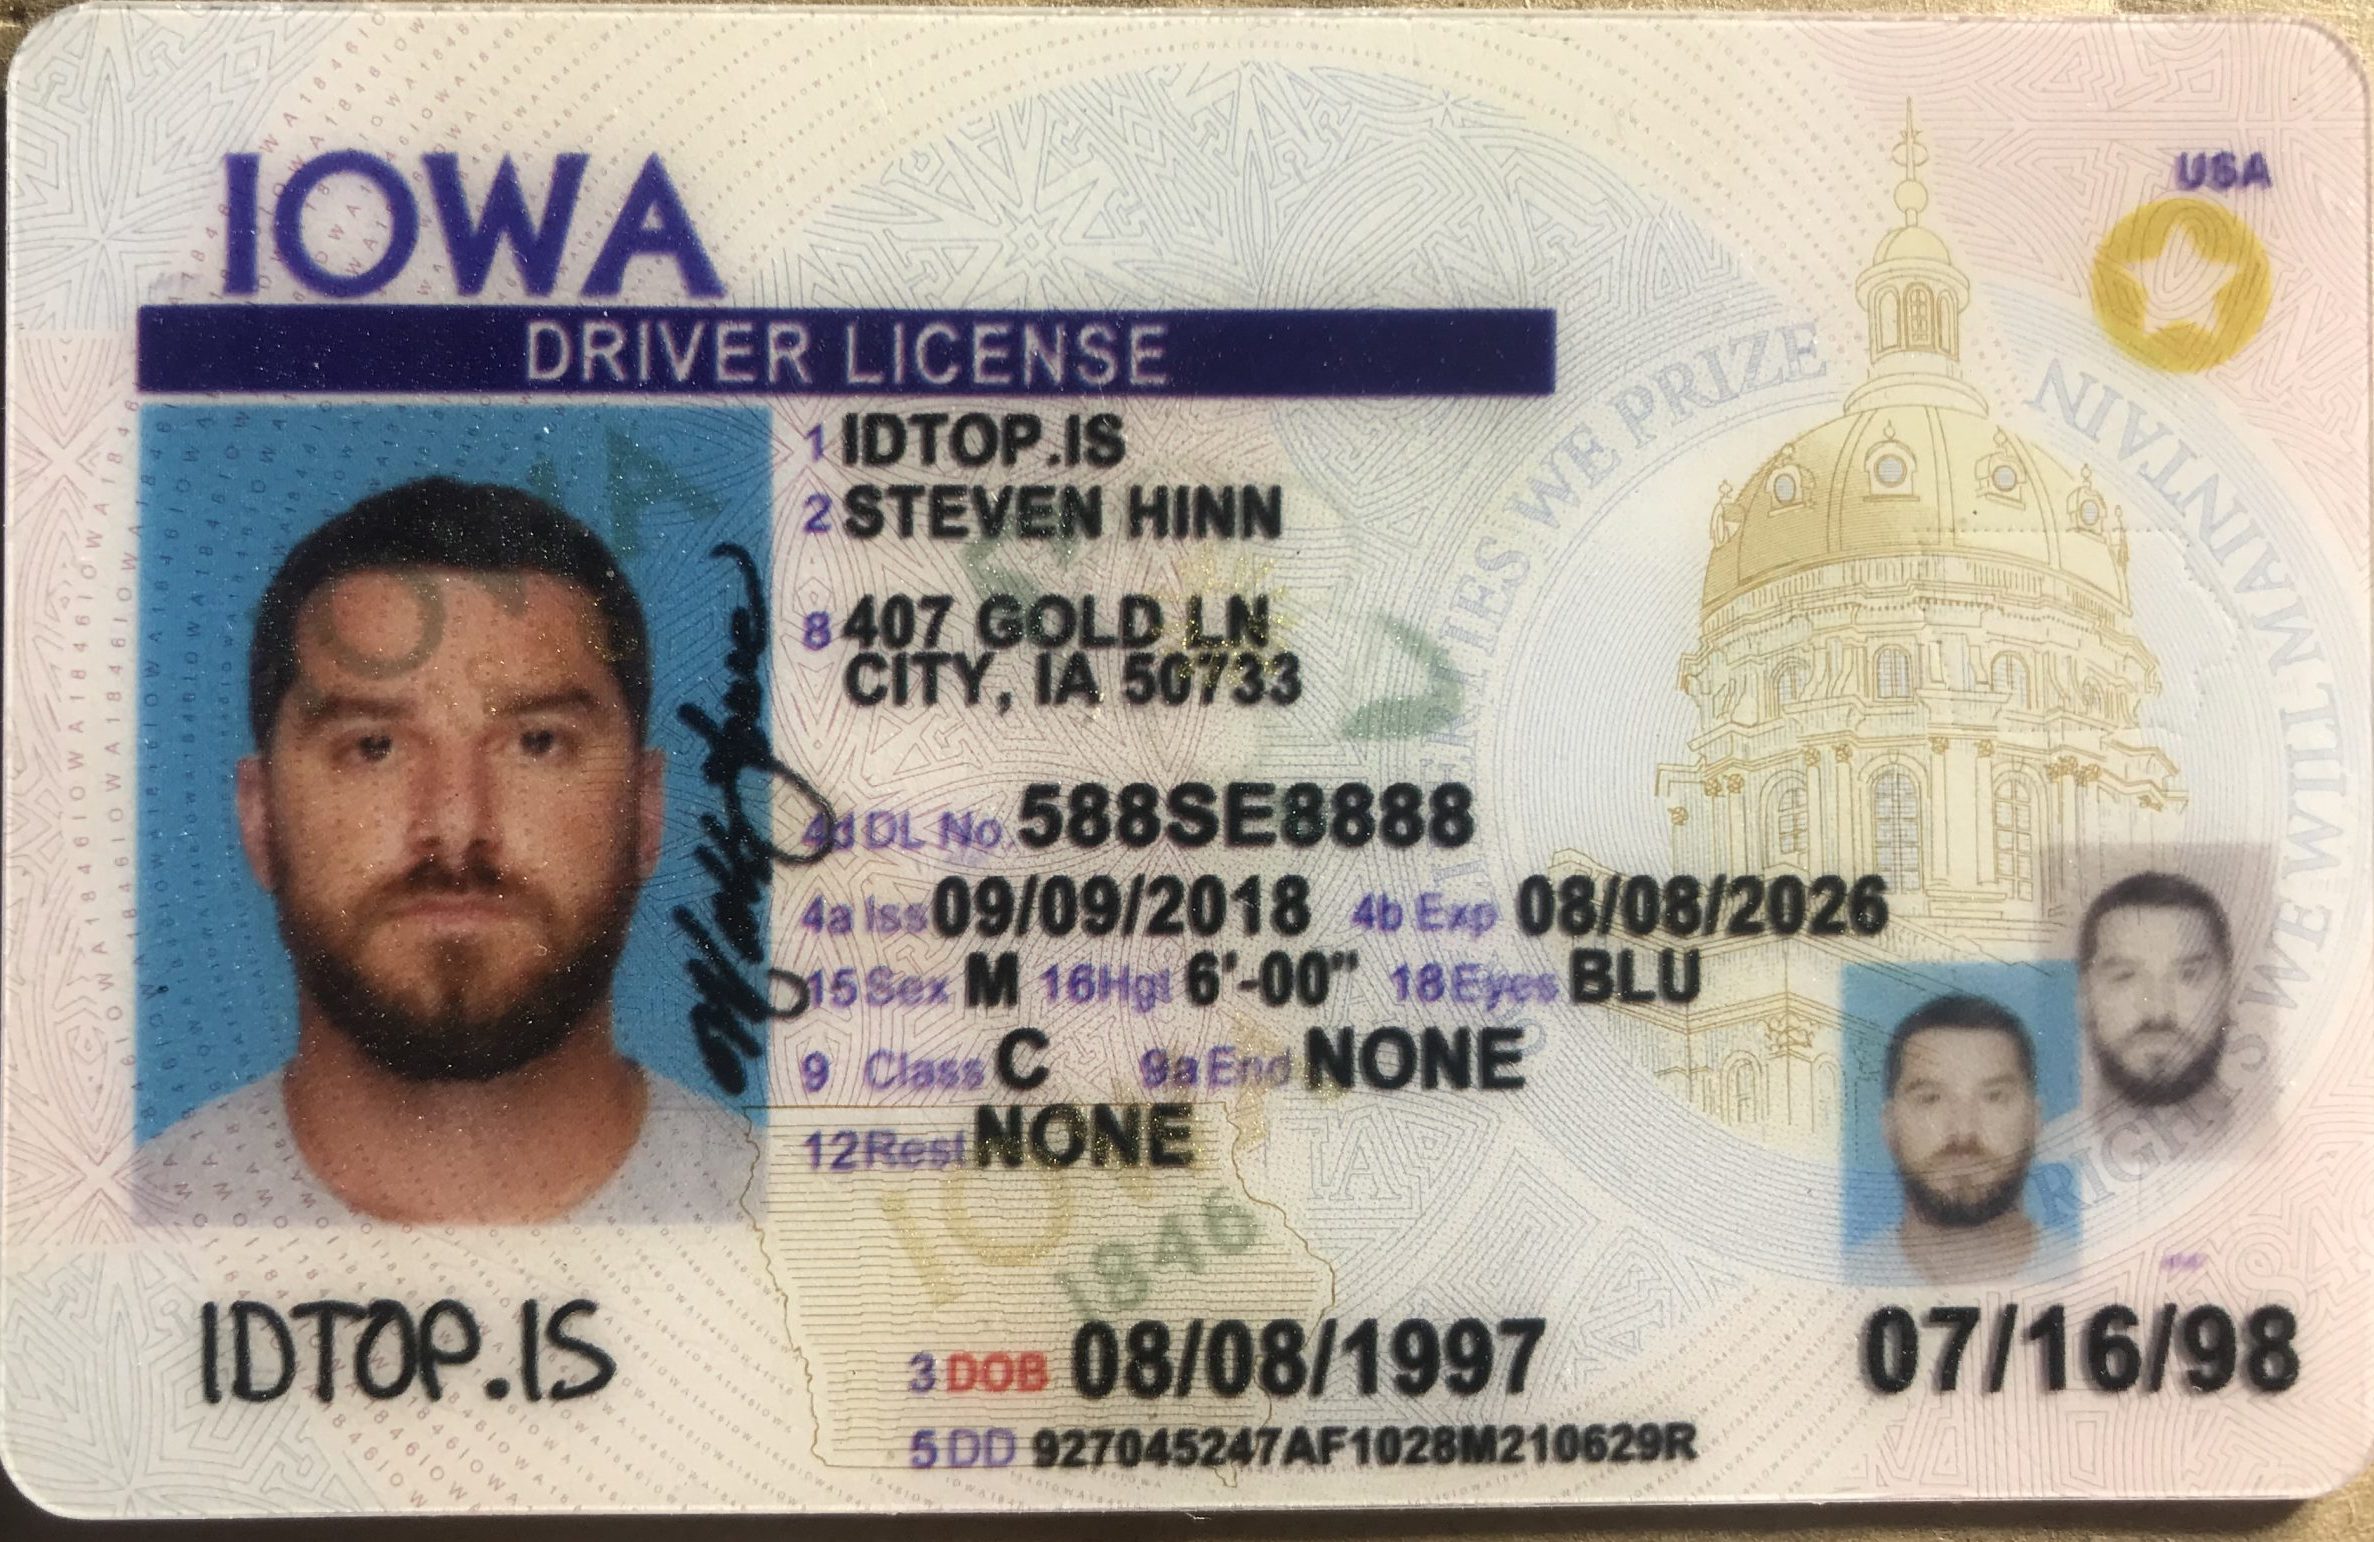 lost drivers license need copy fast virginia